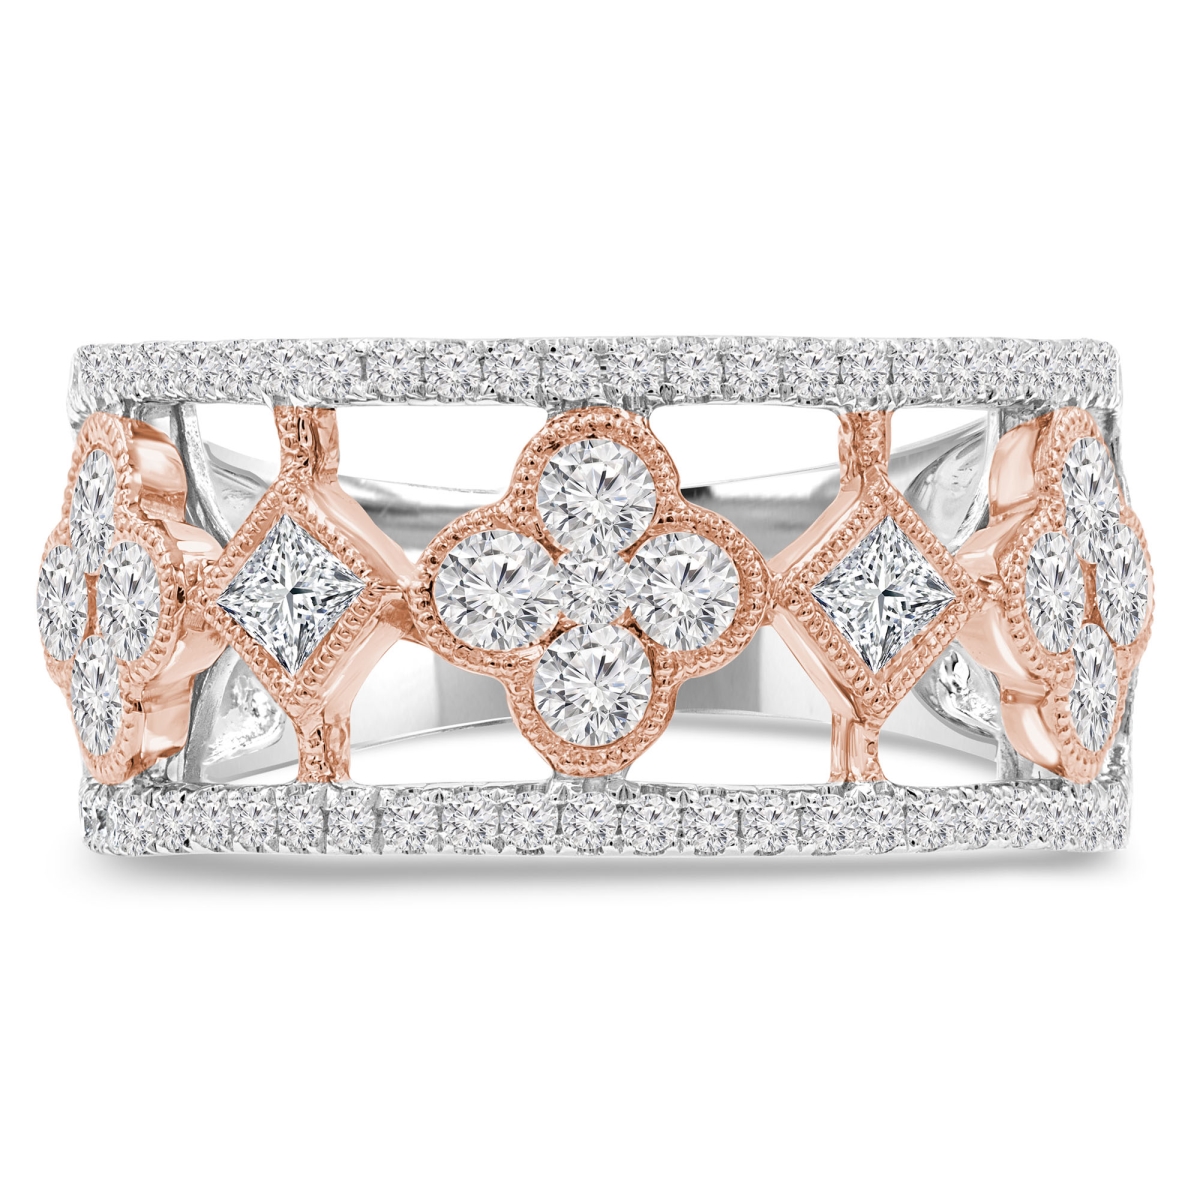 Picture of Majesty Diamonds MDR210138-8 1.13 CTW Princess Diamond Cocktail Ring in 14K Two-Tone Gold - Size 8